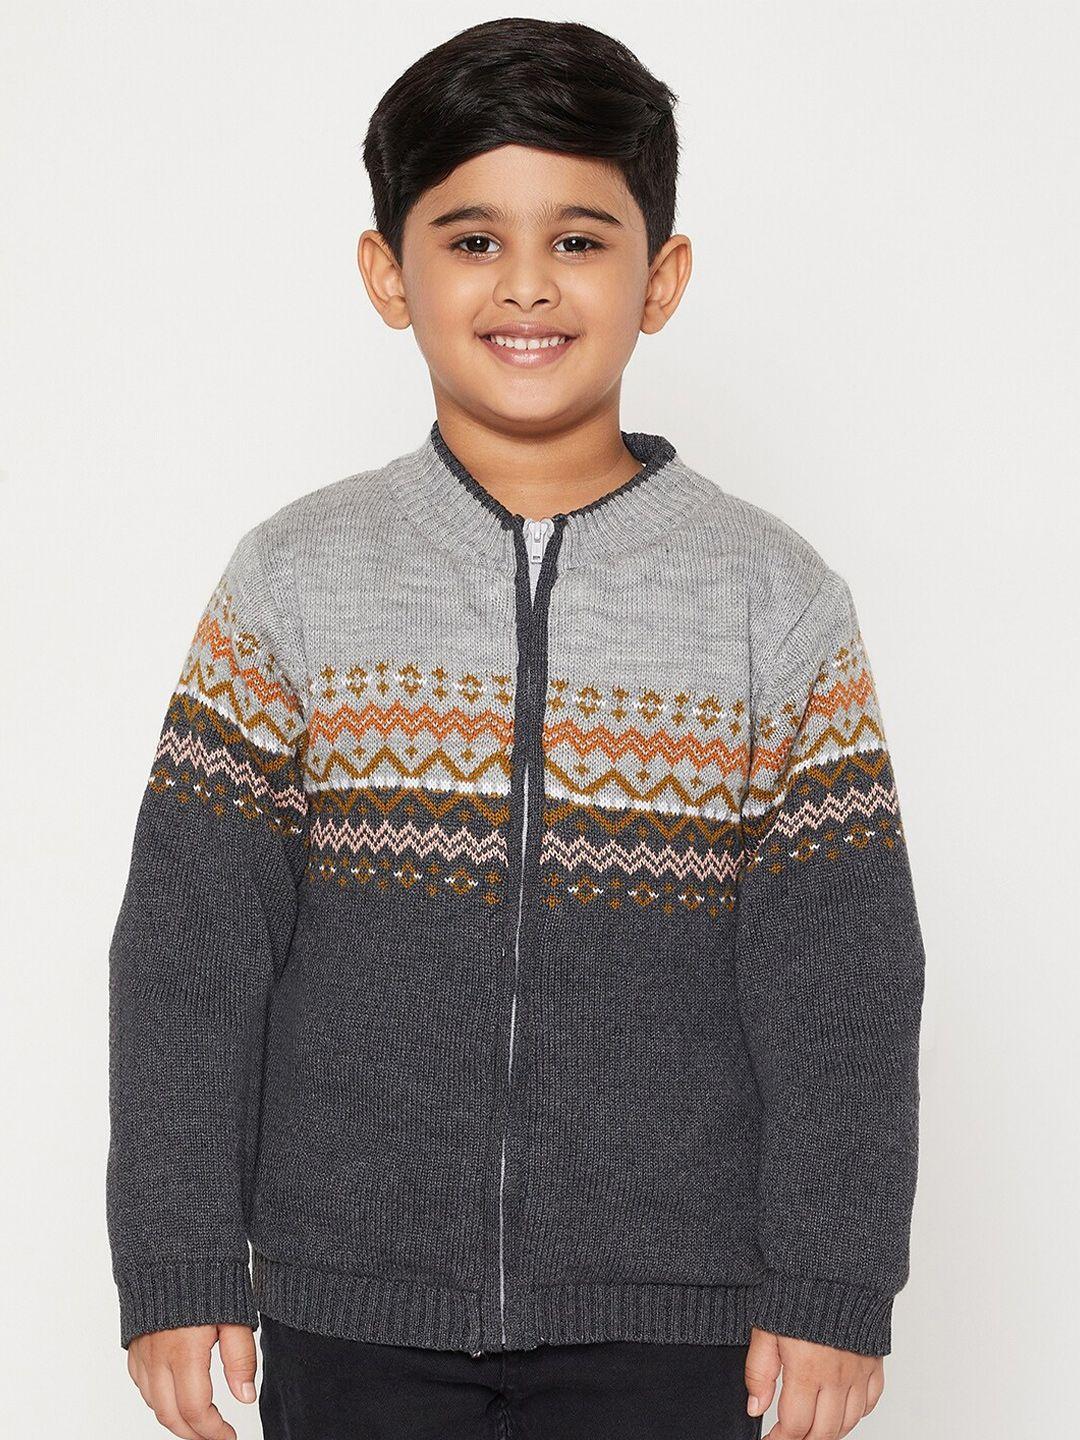 jwaaq boys grey & charcoal colourblocked pullover with embroidered detail